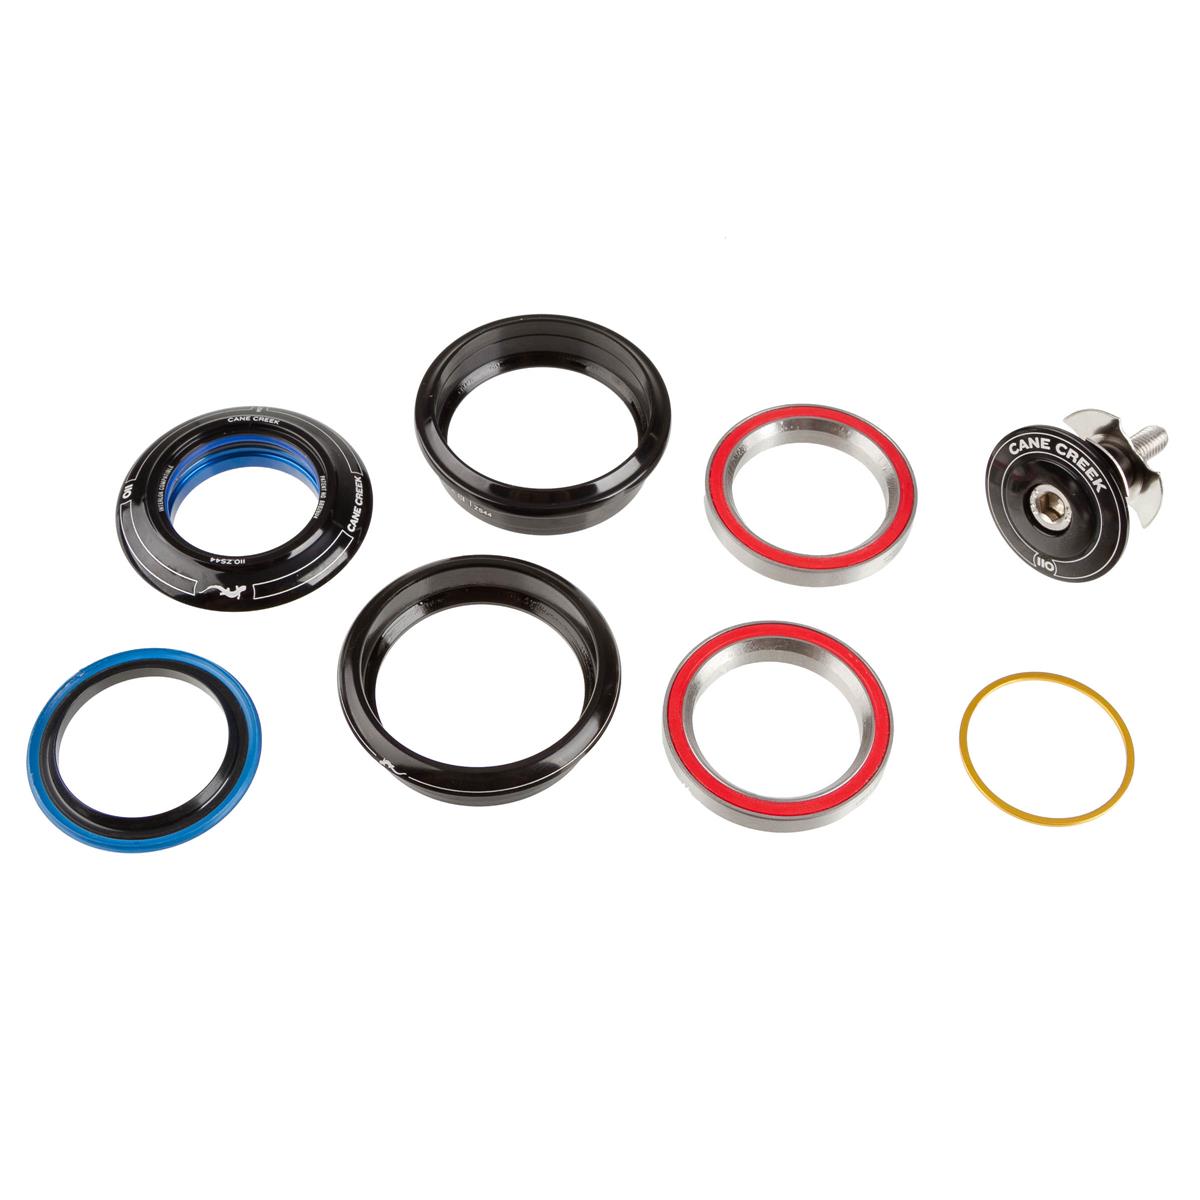 Cane Creek Headset ZS - ZS 110 ZS44 to ZS44/30, short, 1 1/8 inch, Black